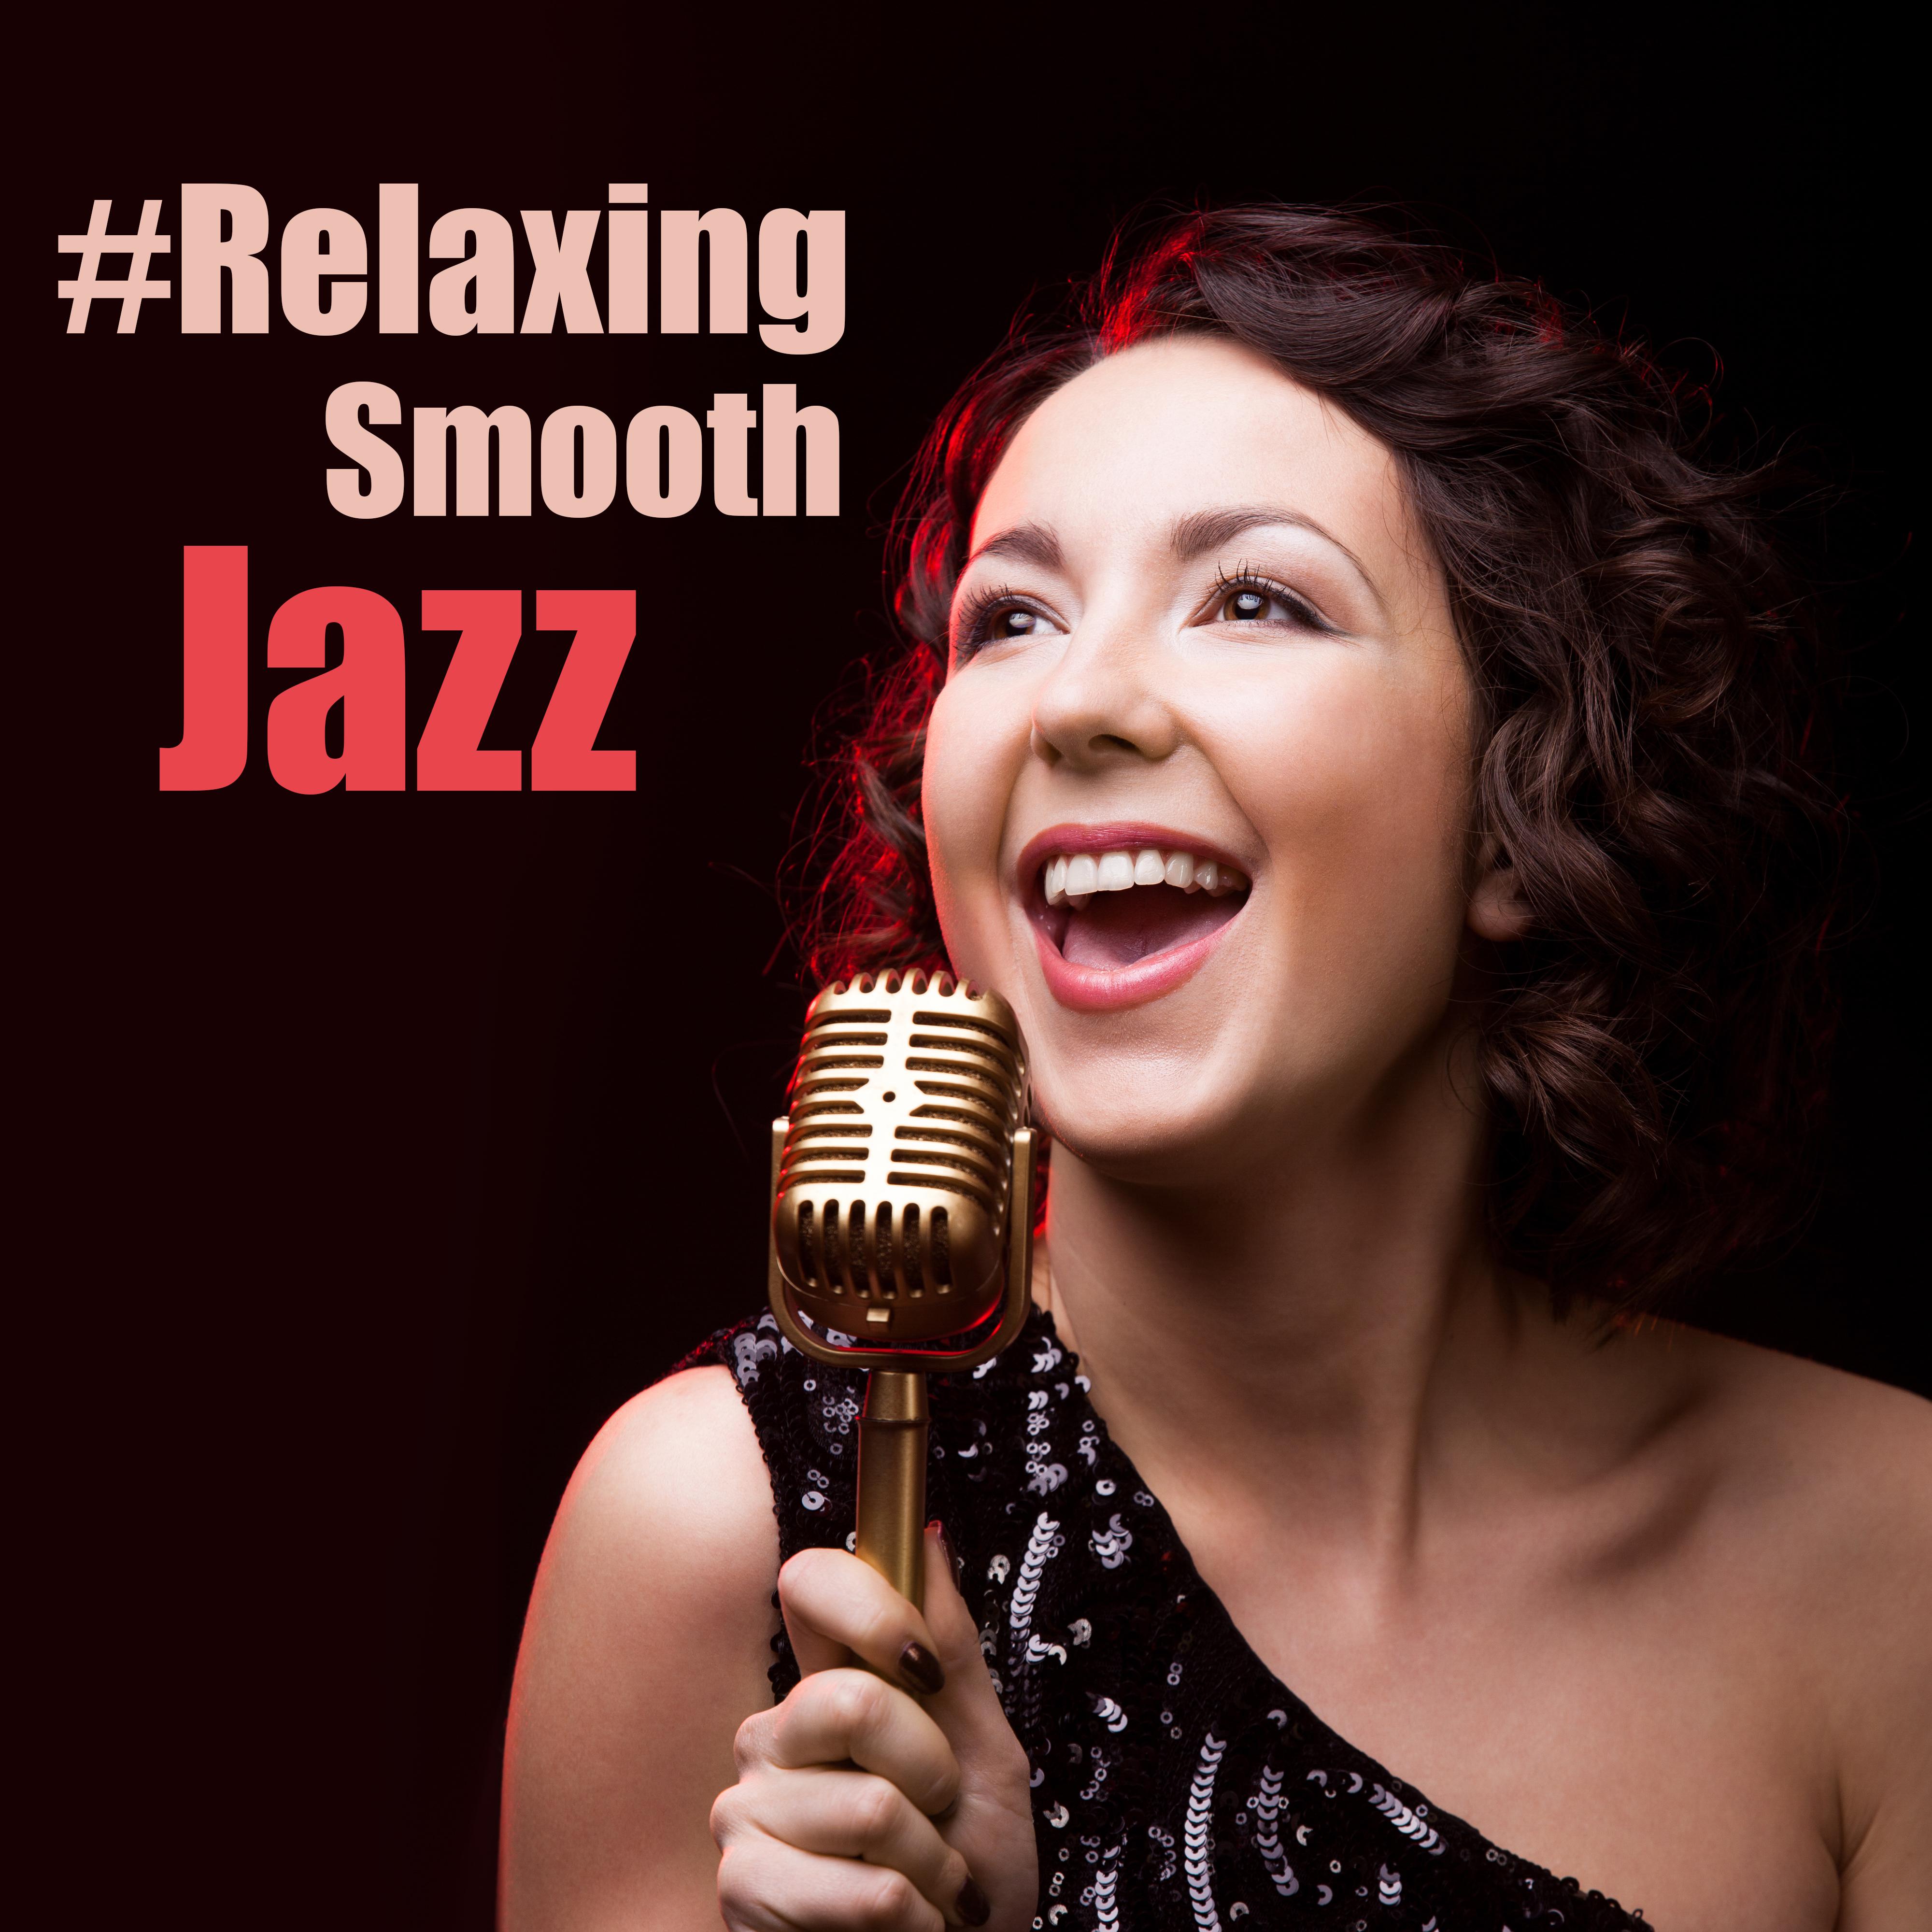 #Relaxing Smooth Jazz